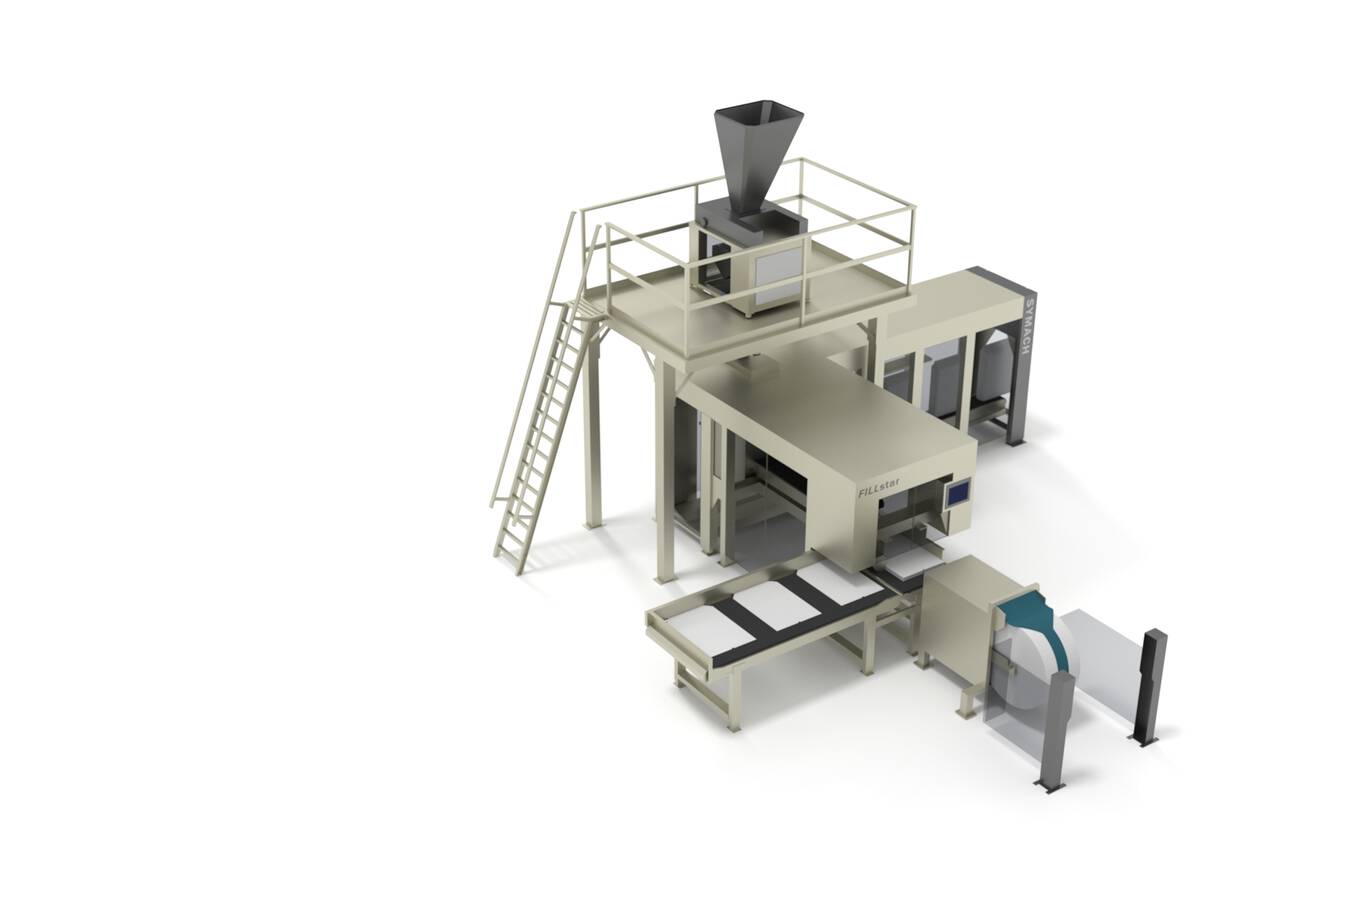 Innovative hybrid SYMACH bagging machine SYMACH features an innovative hybrid bagging machine for open-mouth and tubular film bags that combines a tubular FFS and an open-mouth bagging system.